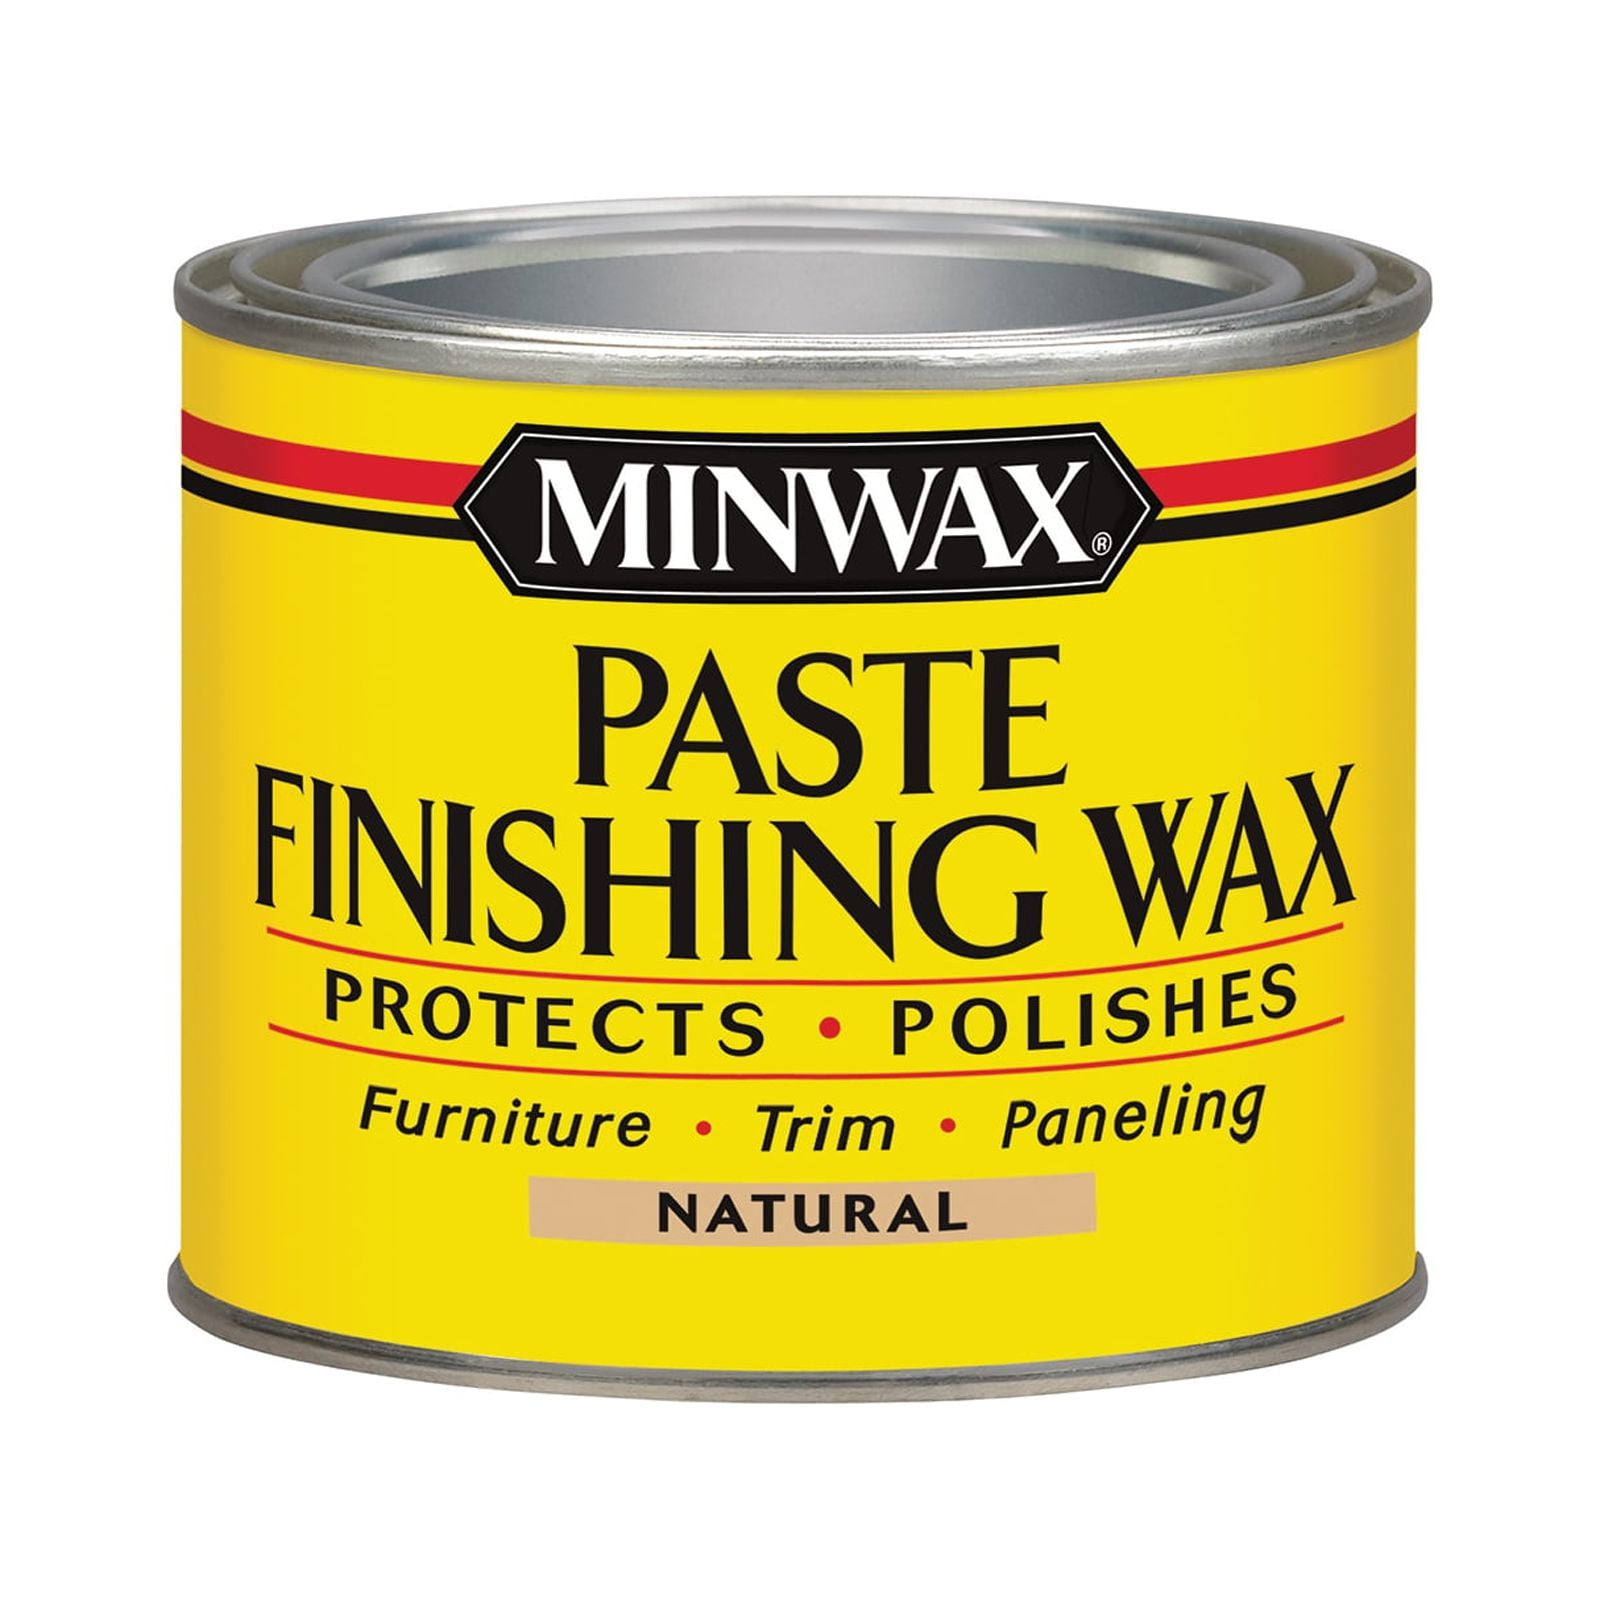 This was the first time I used @minwaxusa paste wax to finish a